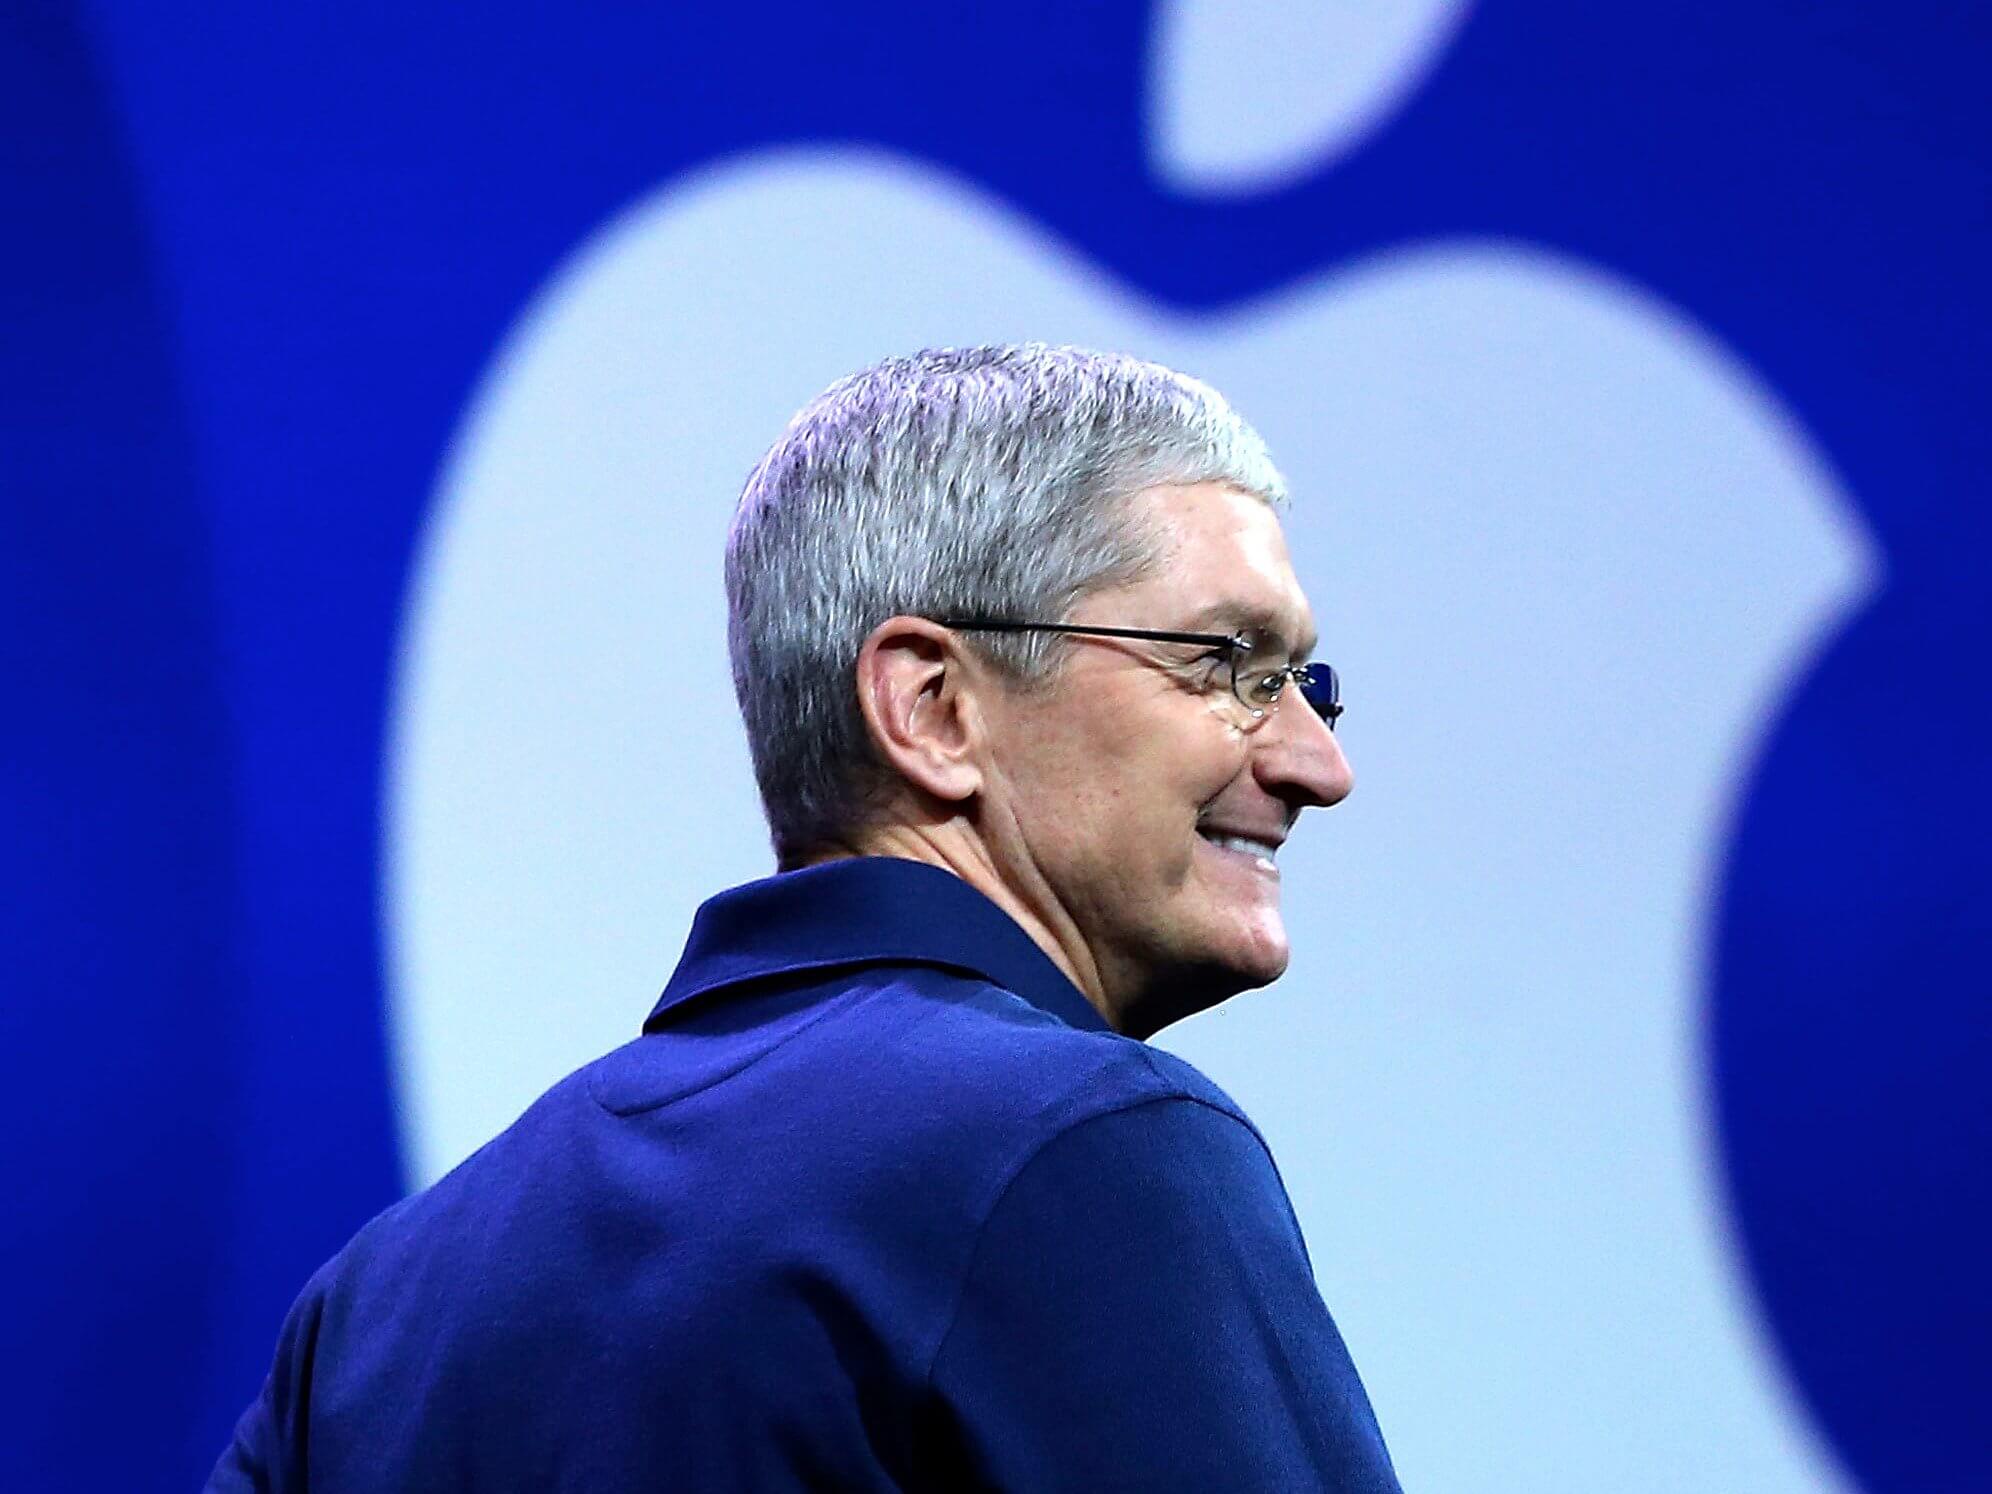 Tim Cook addresses rising interest in AI, saying more future Apple products will use it